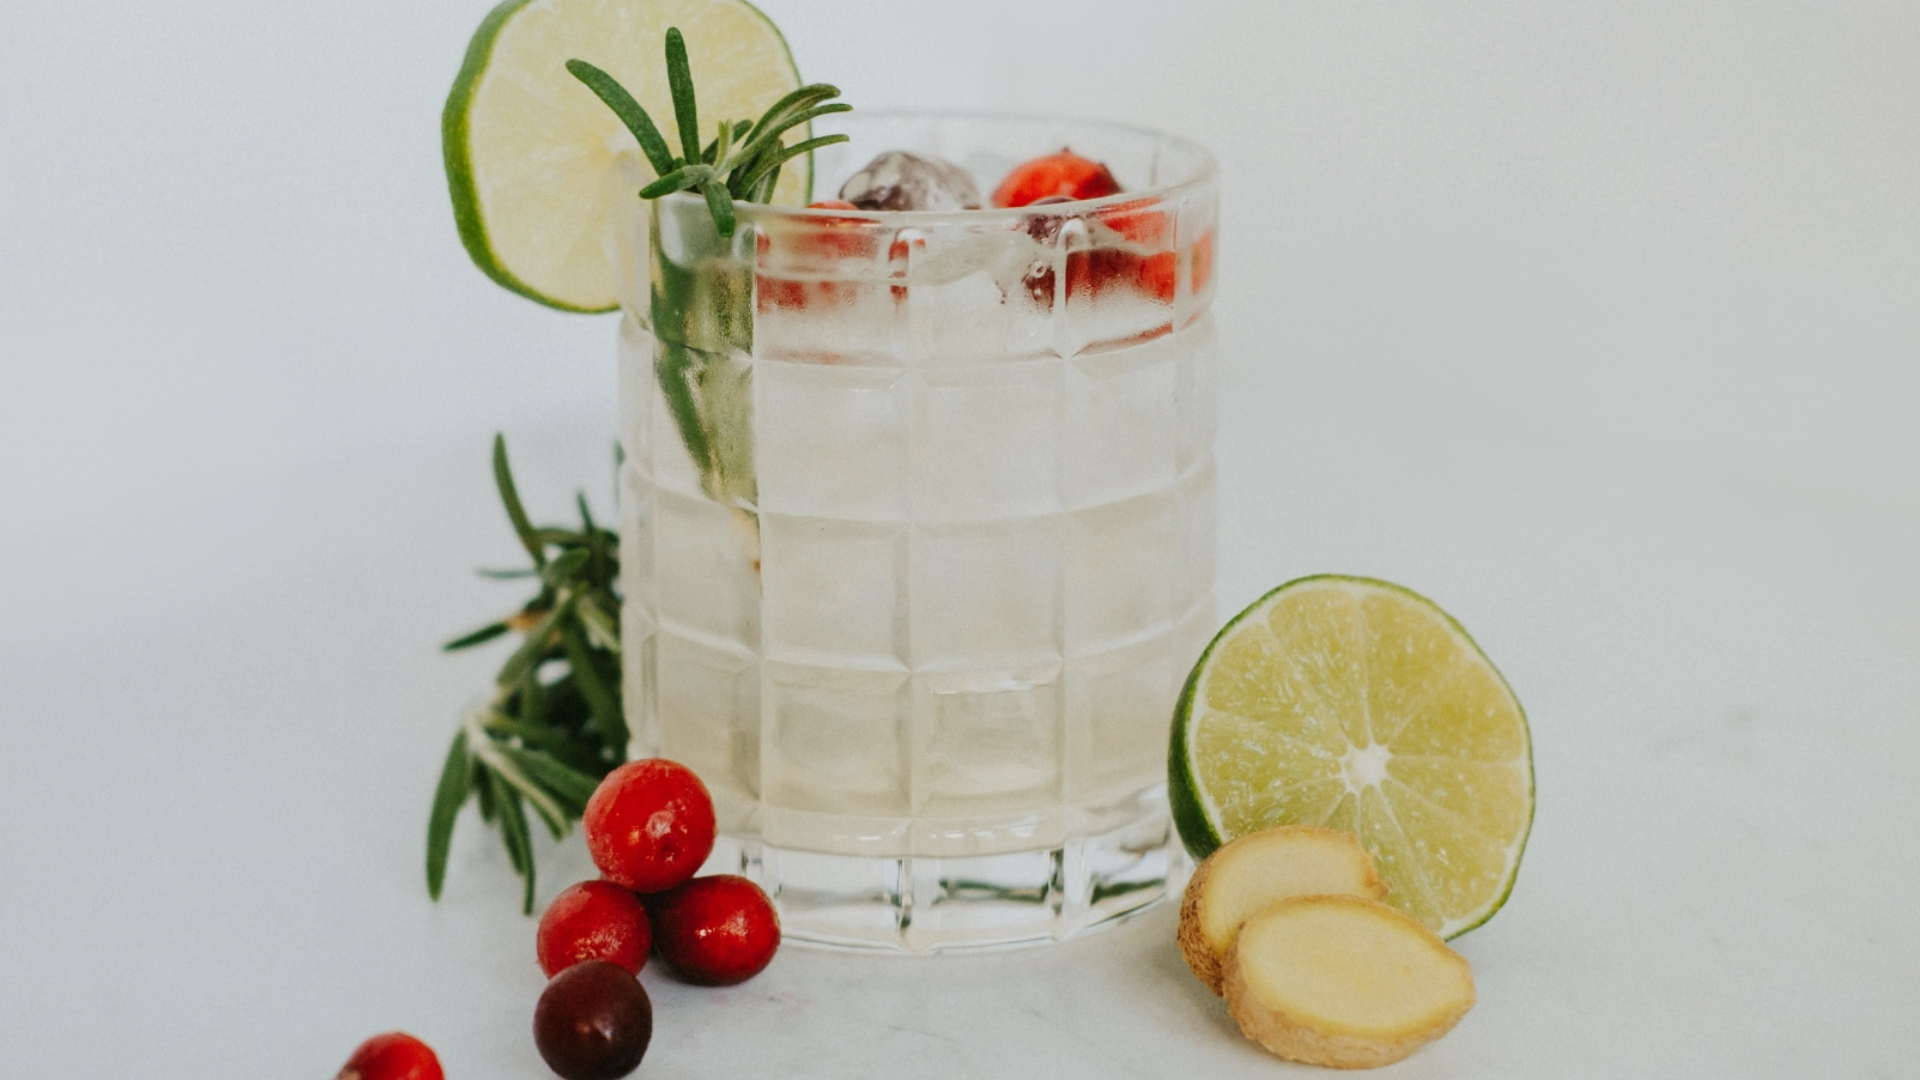 Learn how to make a few non-alcoholic options to keep all of your friends and family included.